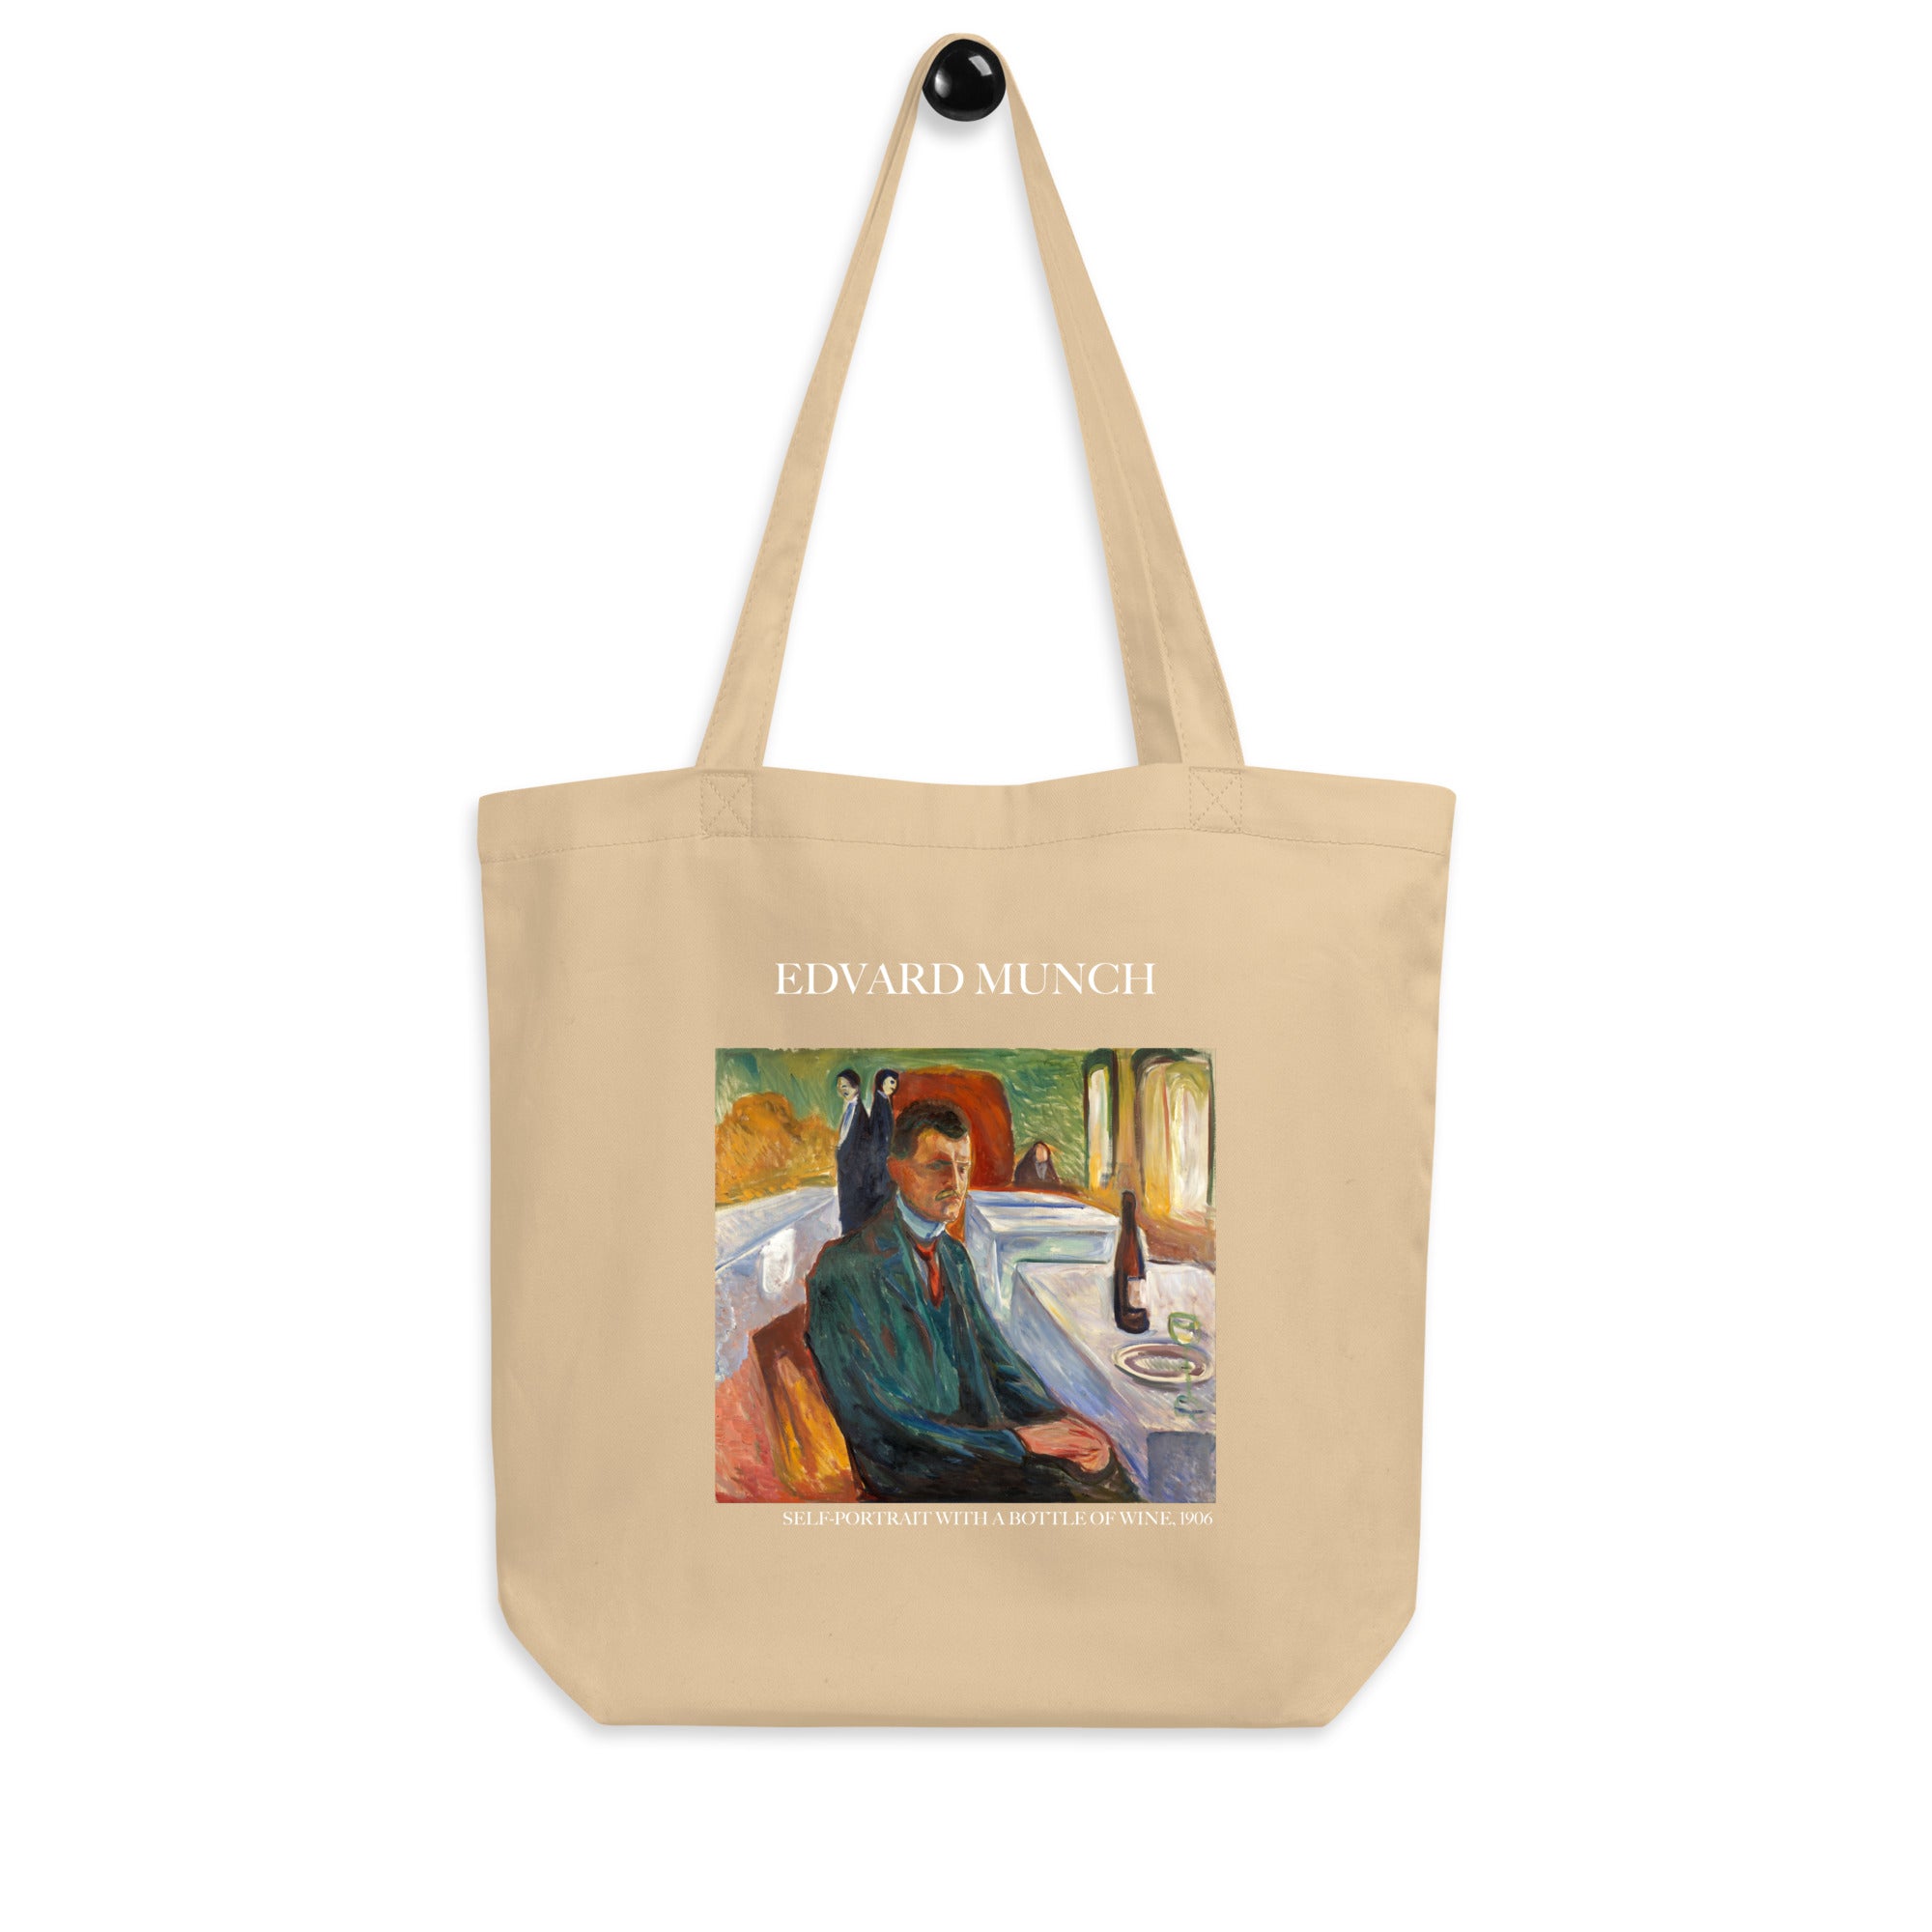 Edvard Munch 'Self-Portrait with a Bottle of Wine' Famous Painting Totebag | Eco Friendly Art Tote Bag